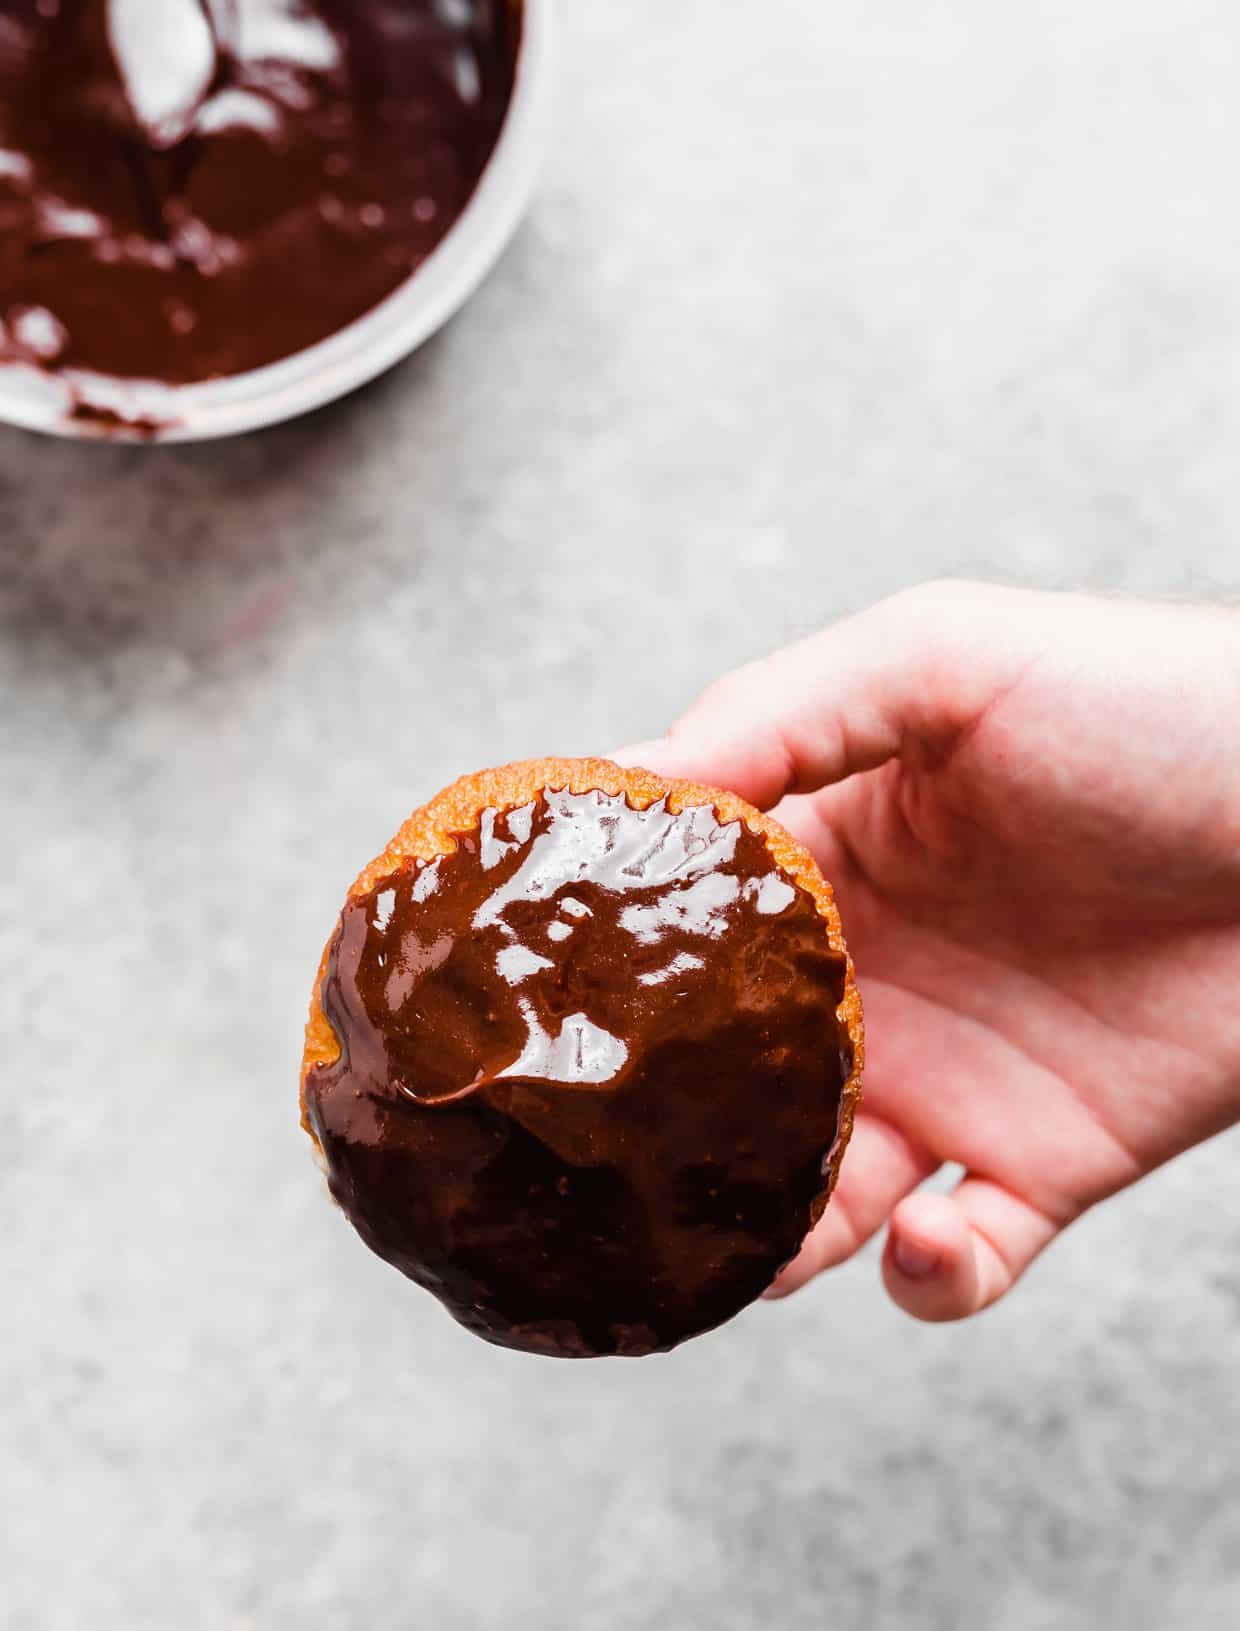 A hand holding a chocolate dipped Boston Cream Donut.